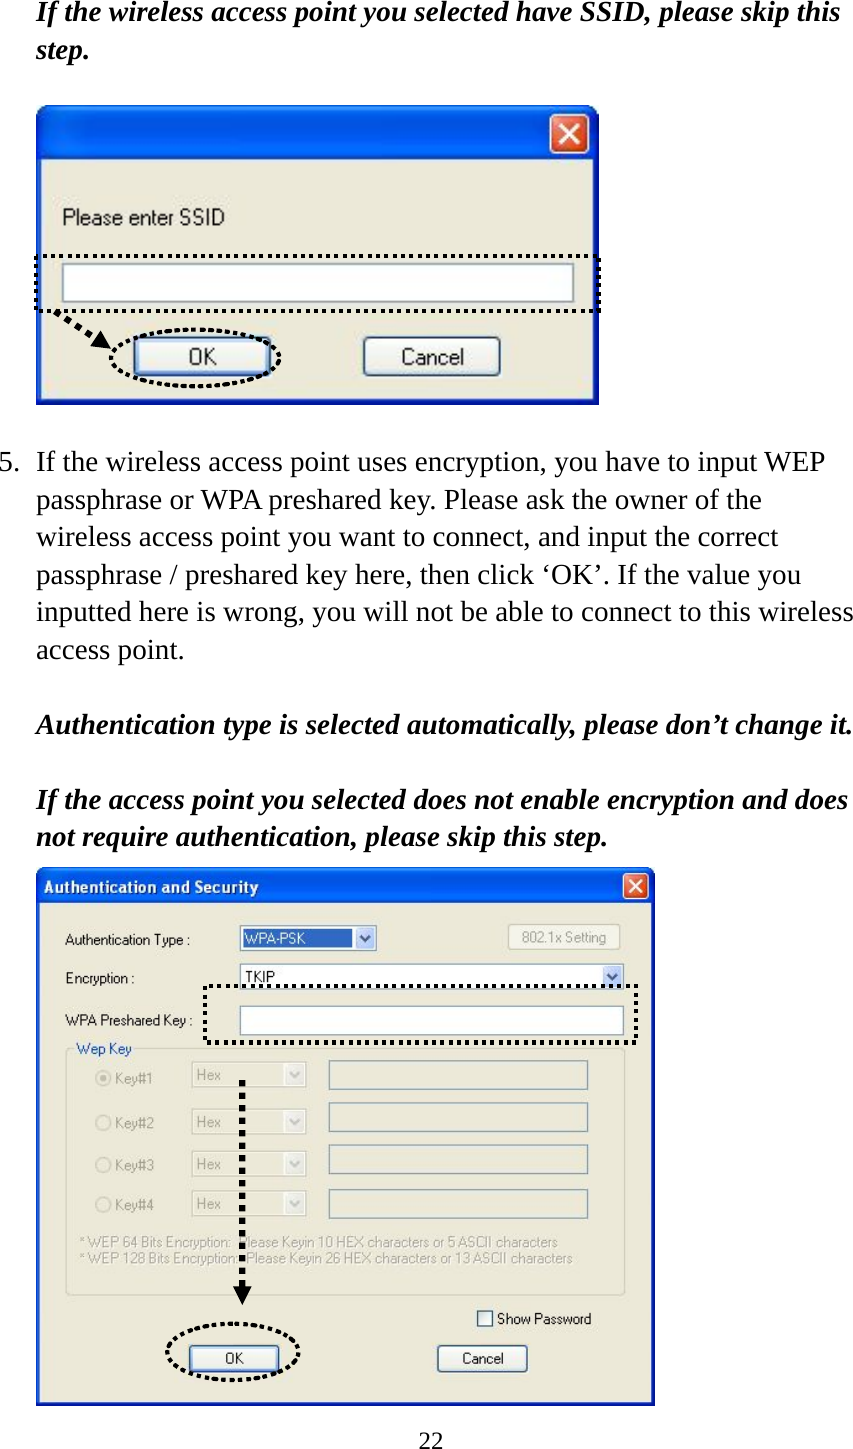  22 If the wireless access point you selected have SSID, please skip this step.    5. If the wireless access point uses encryption, you have to input WEP passphrase or WPA preshared key. Please ask the owner of the wireless access point you want to connect, and input the correct passphrase / preshared key here, then click ‘OK’. If the value you inputted here is wrong, you will not be able to connect to this wireless access point.  Authentication type is selected automatically, please don’t change it.    If the access point you selected does not enable encryption and does not require authentication, please skip this step.  